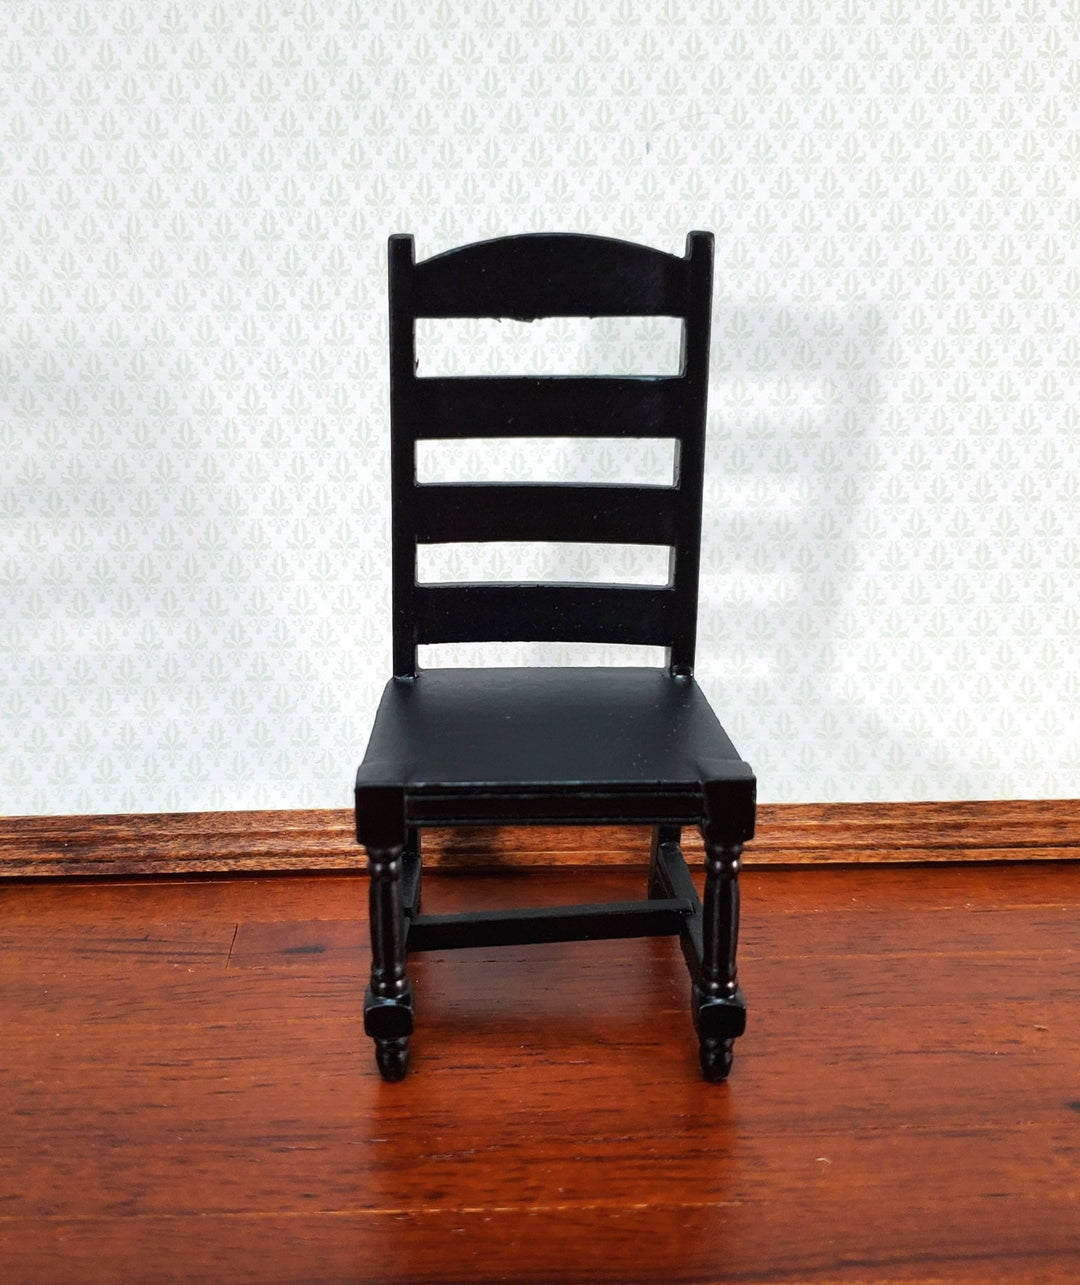 Dollhouse Chair Ladderback for Kitchen or Dining Room Black 1:12 Scale Miniature Furniture - Miniature Crush